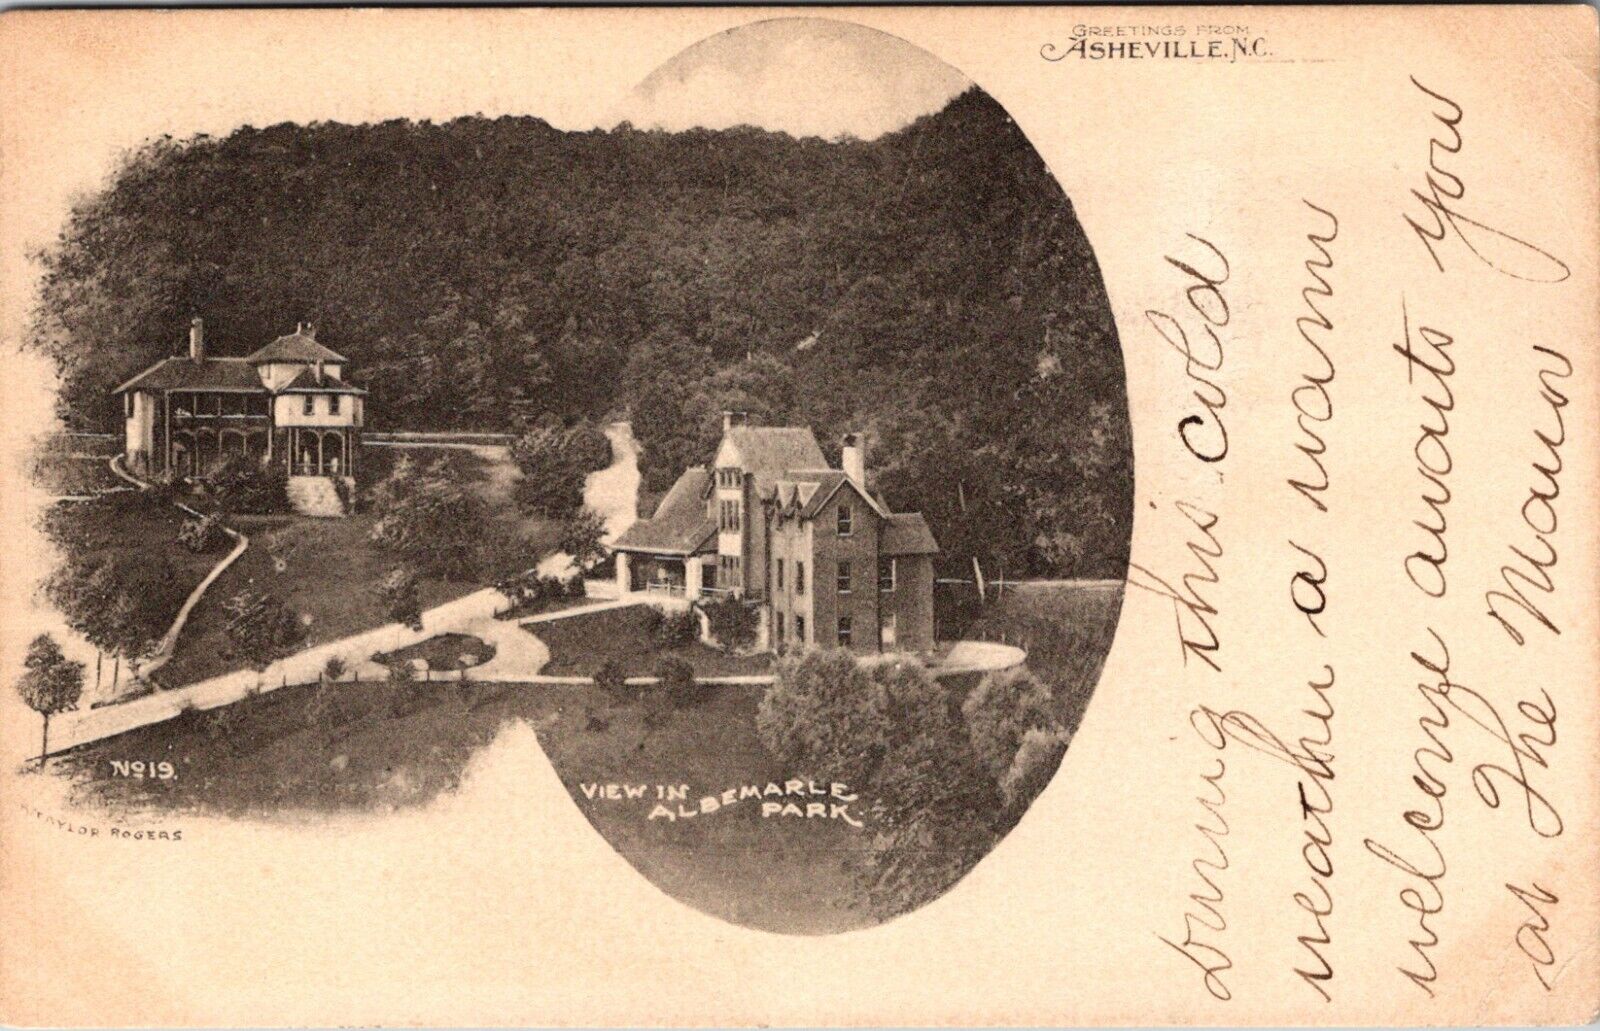 Greetings from Asheville, NC View in Albemarle Park 1905 Antique Postcard I655